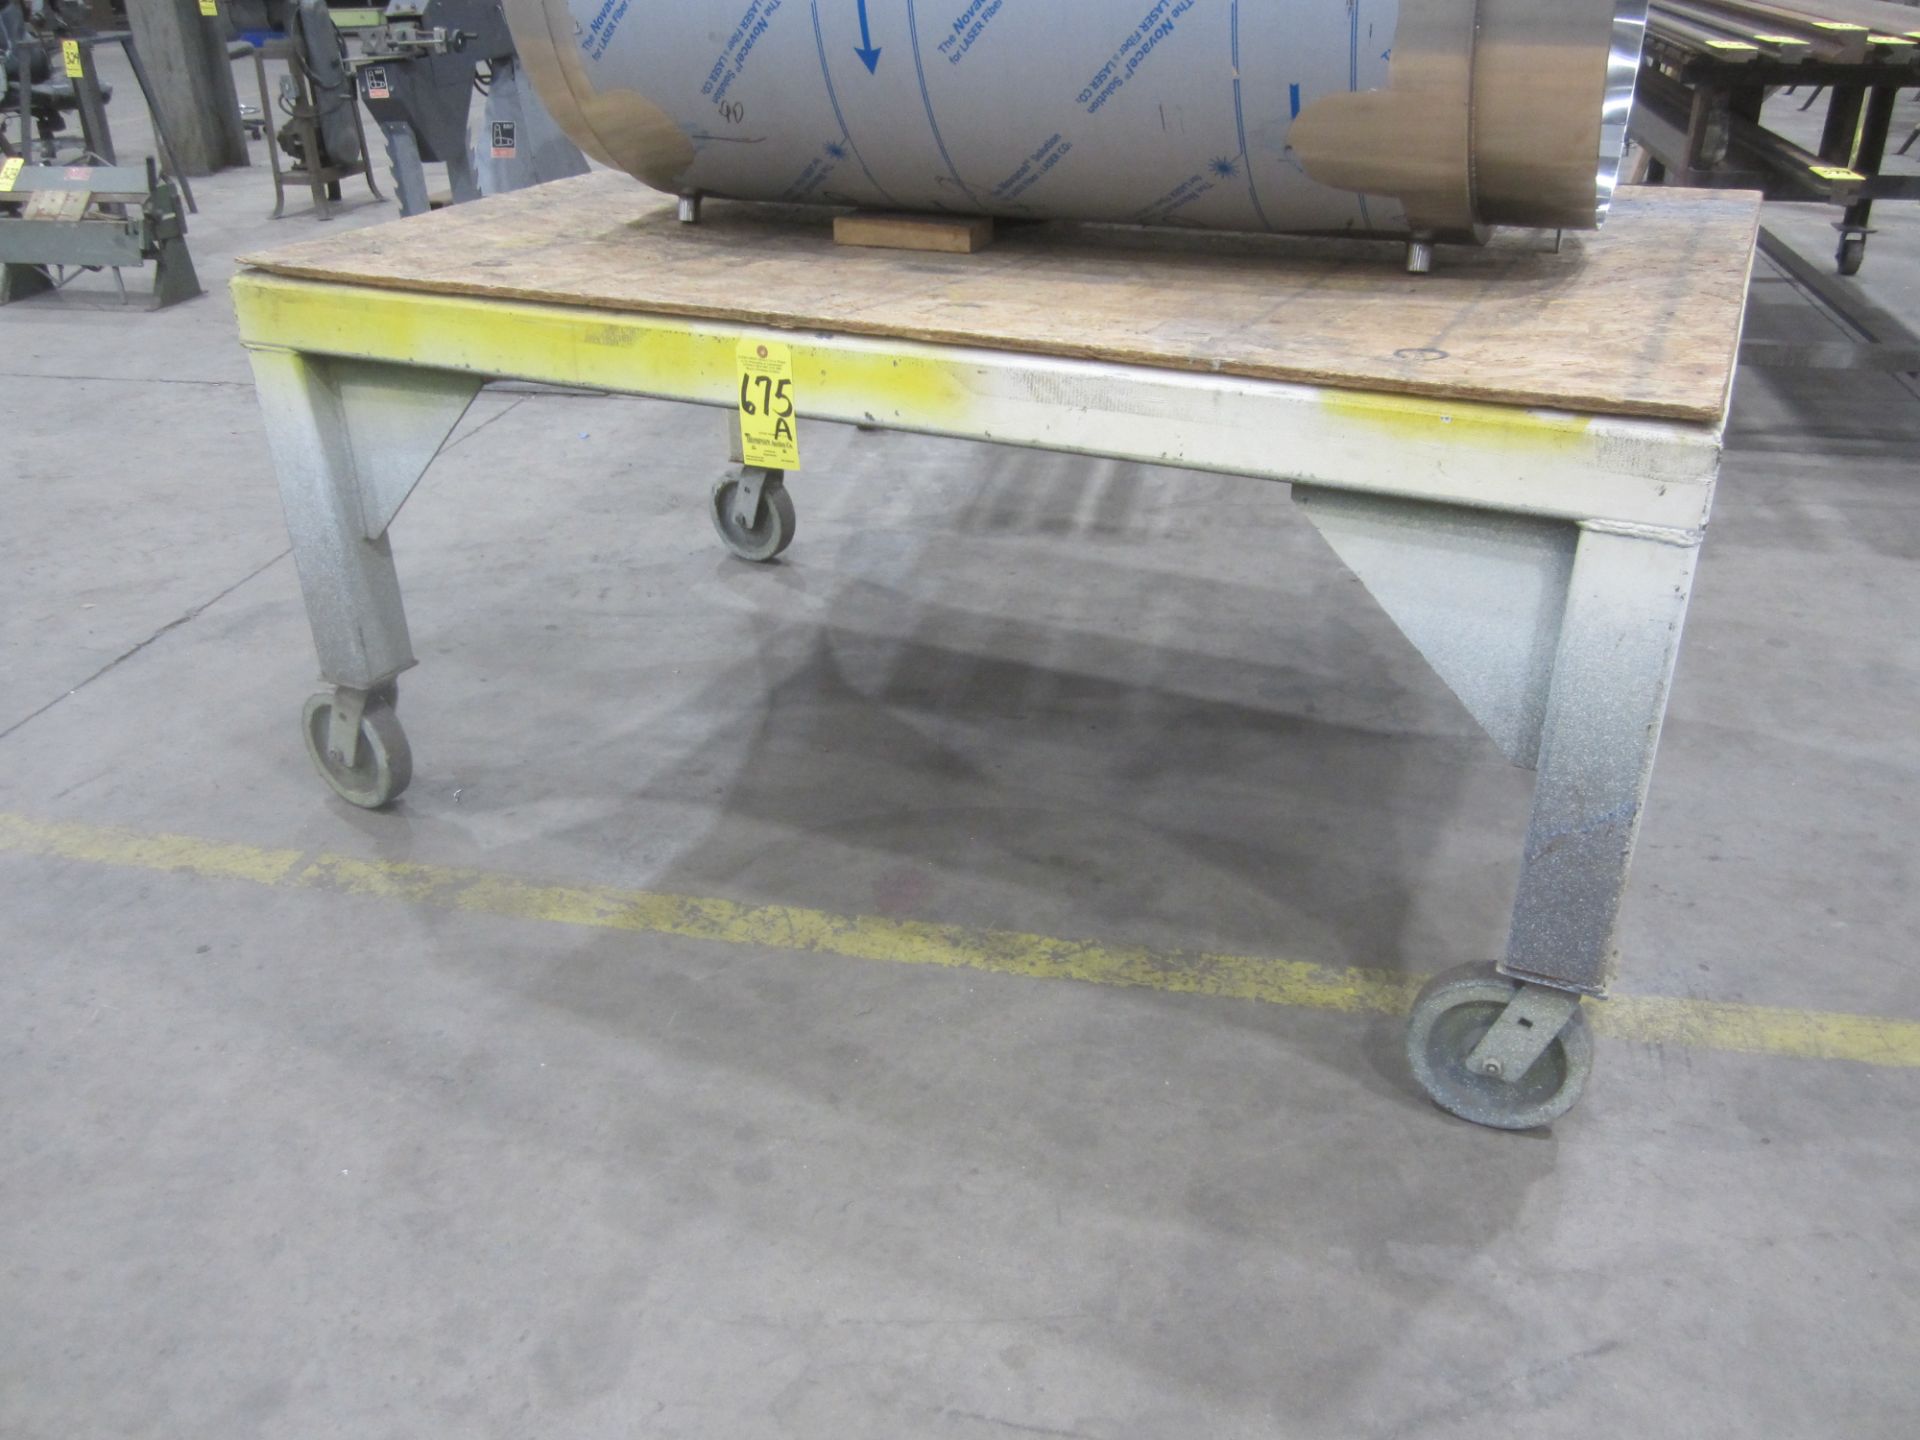 Heavy Duty Shop Table on Casters, 48" X 72" X 34" High, No Contents